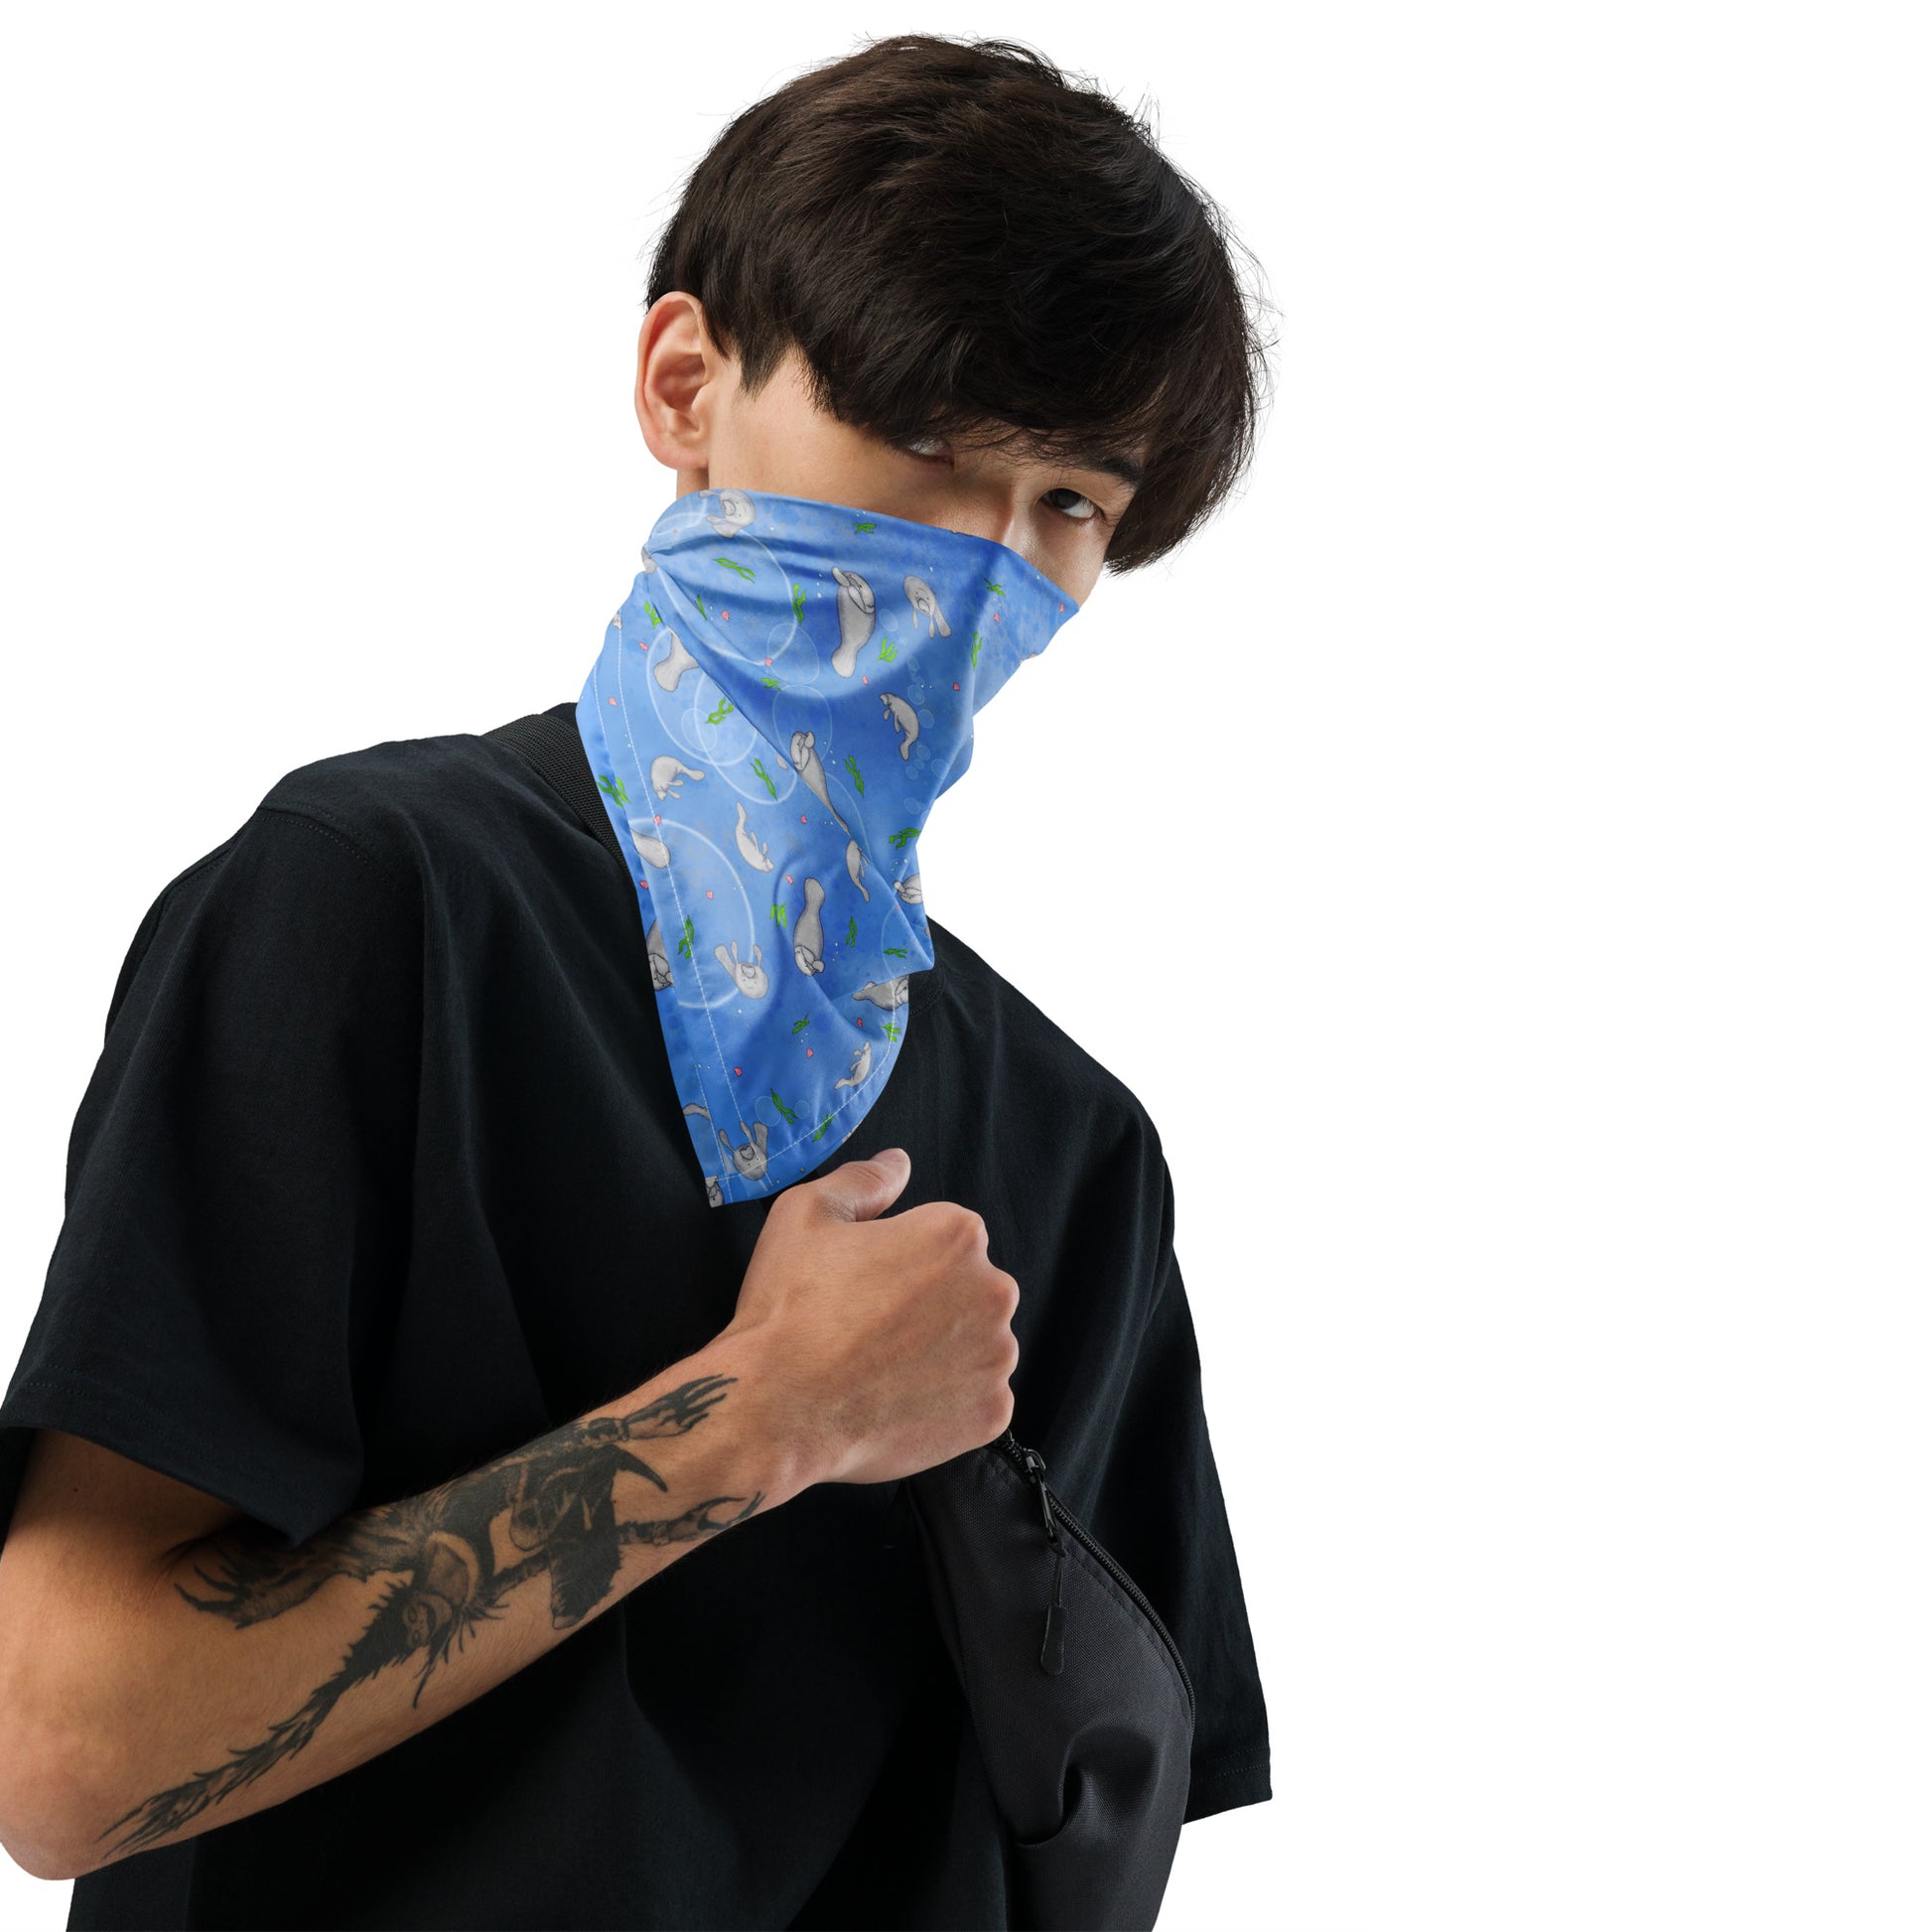 Manatee bandana. Shown as a bandana mask on a male model. Features patterned design of hand-illustrated manatees, seaweed, seashells, and bubbles on a blue  background.